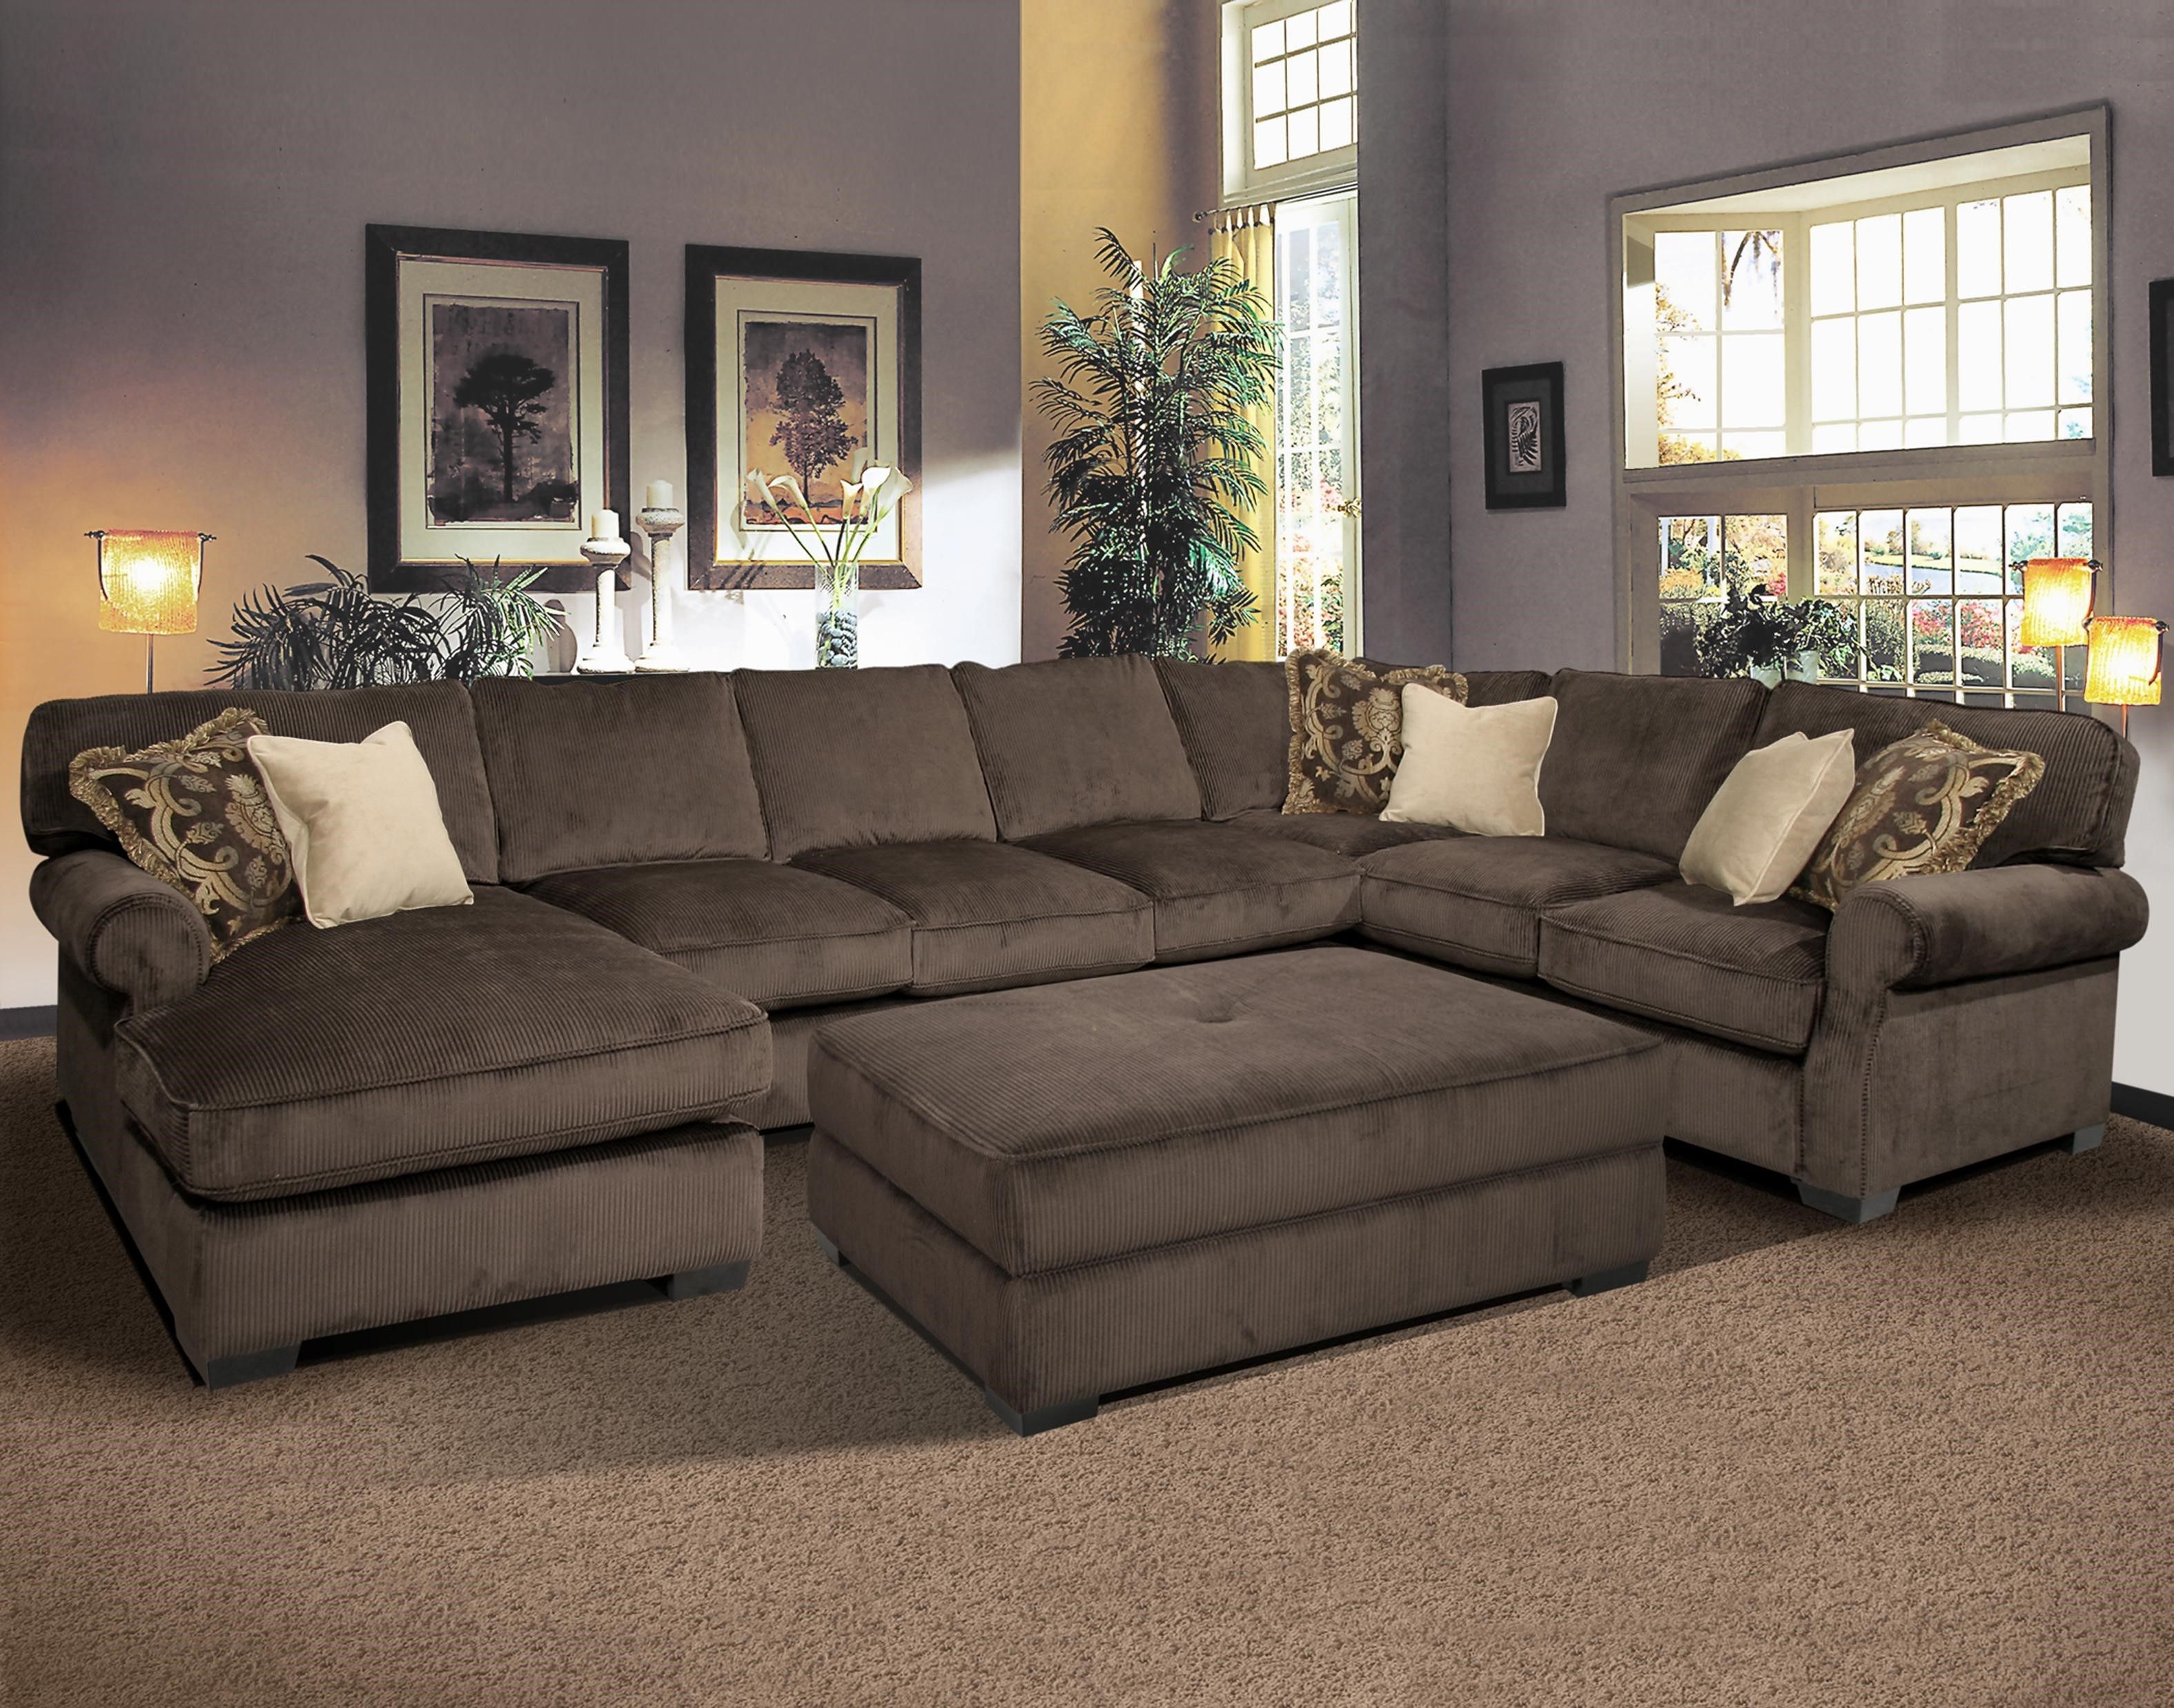 Cheap Sectional Sofas Houston Tx 55 With Cheap Sectional Sofas With Regard To Houston Tx Sectional Sofas (View 3 of 10)